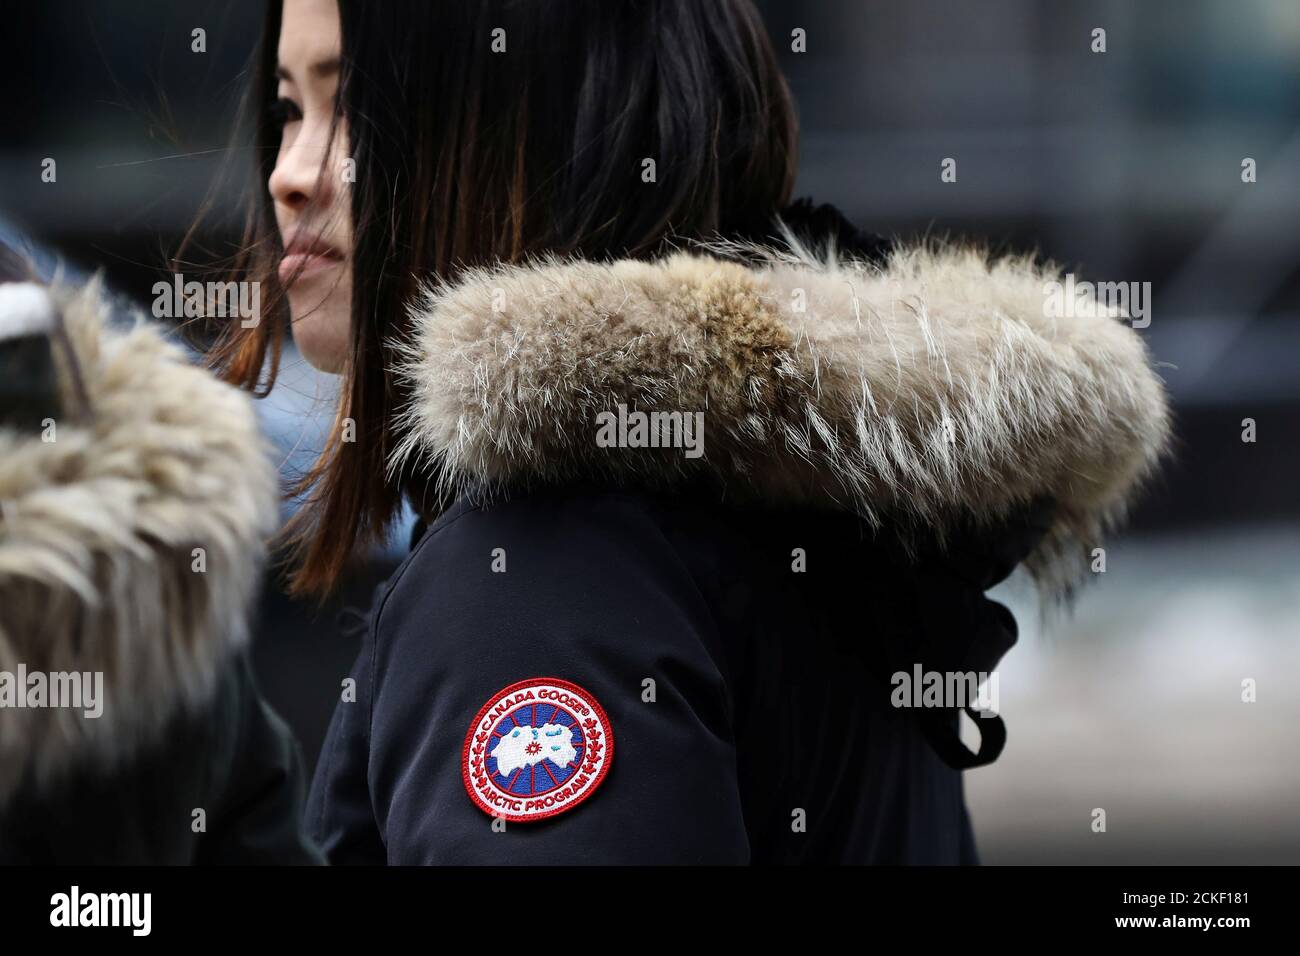 Canada Goose Jacket High Resolution Stock Photography and Images - Alamy